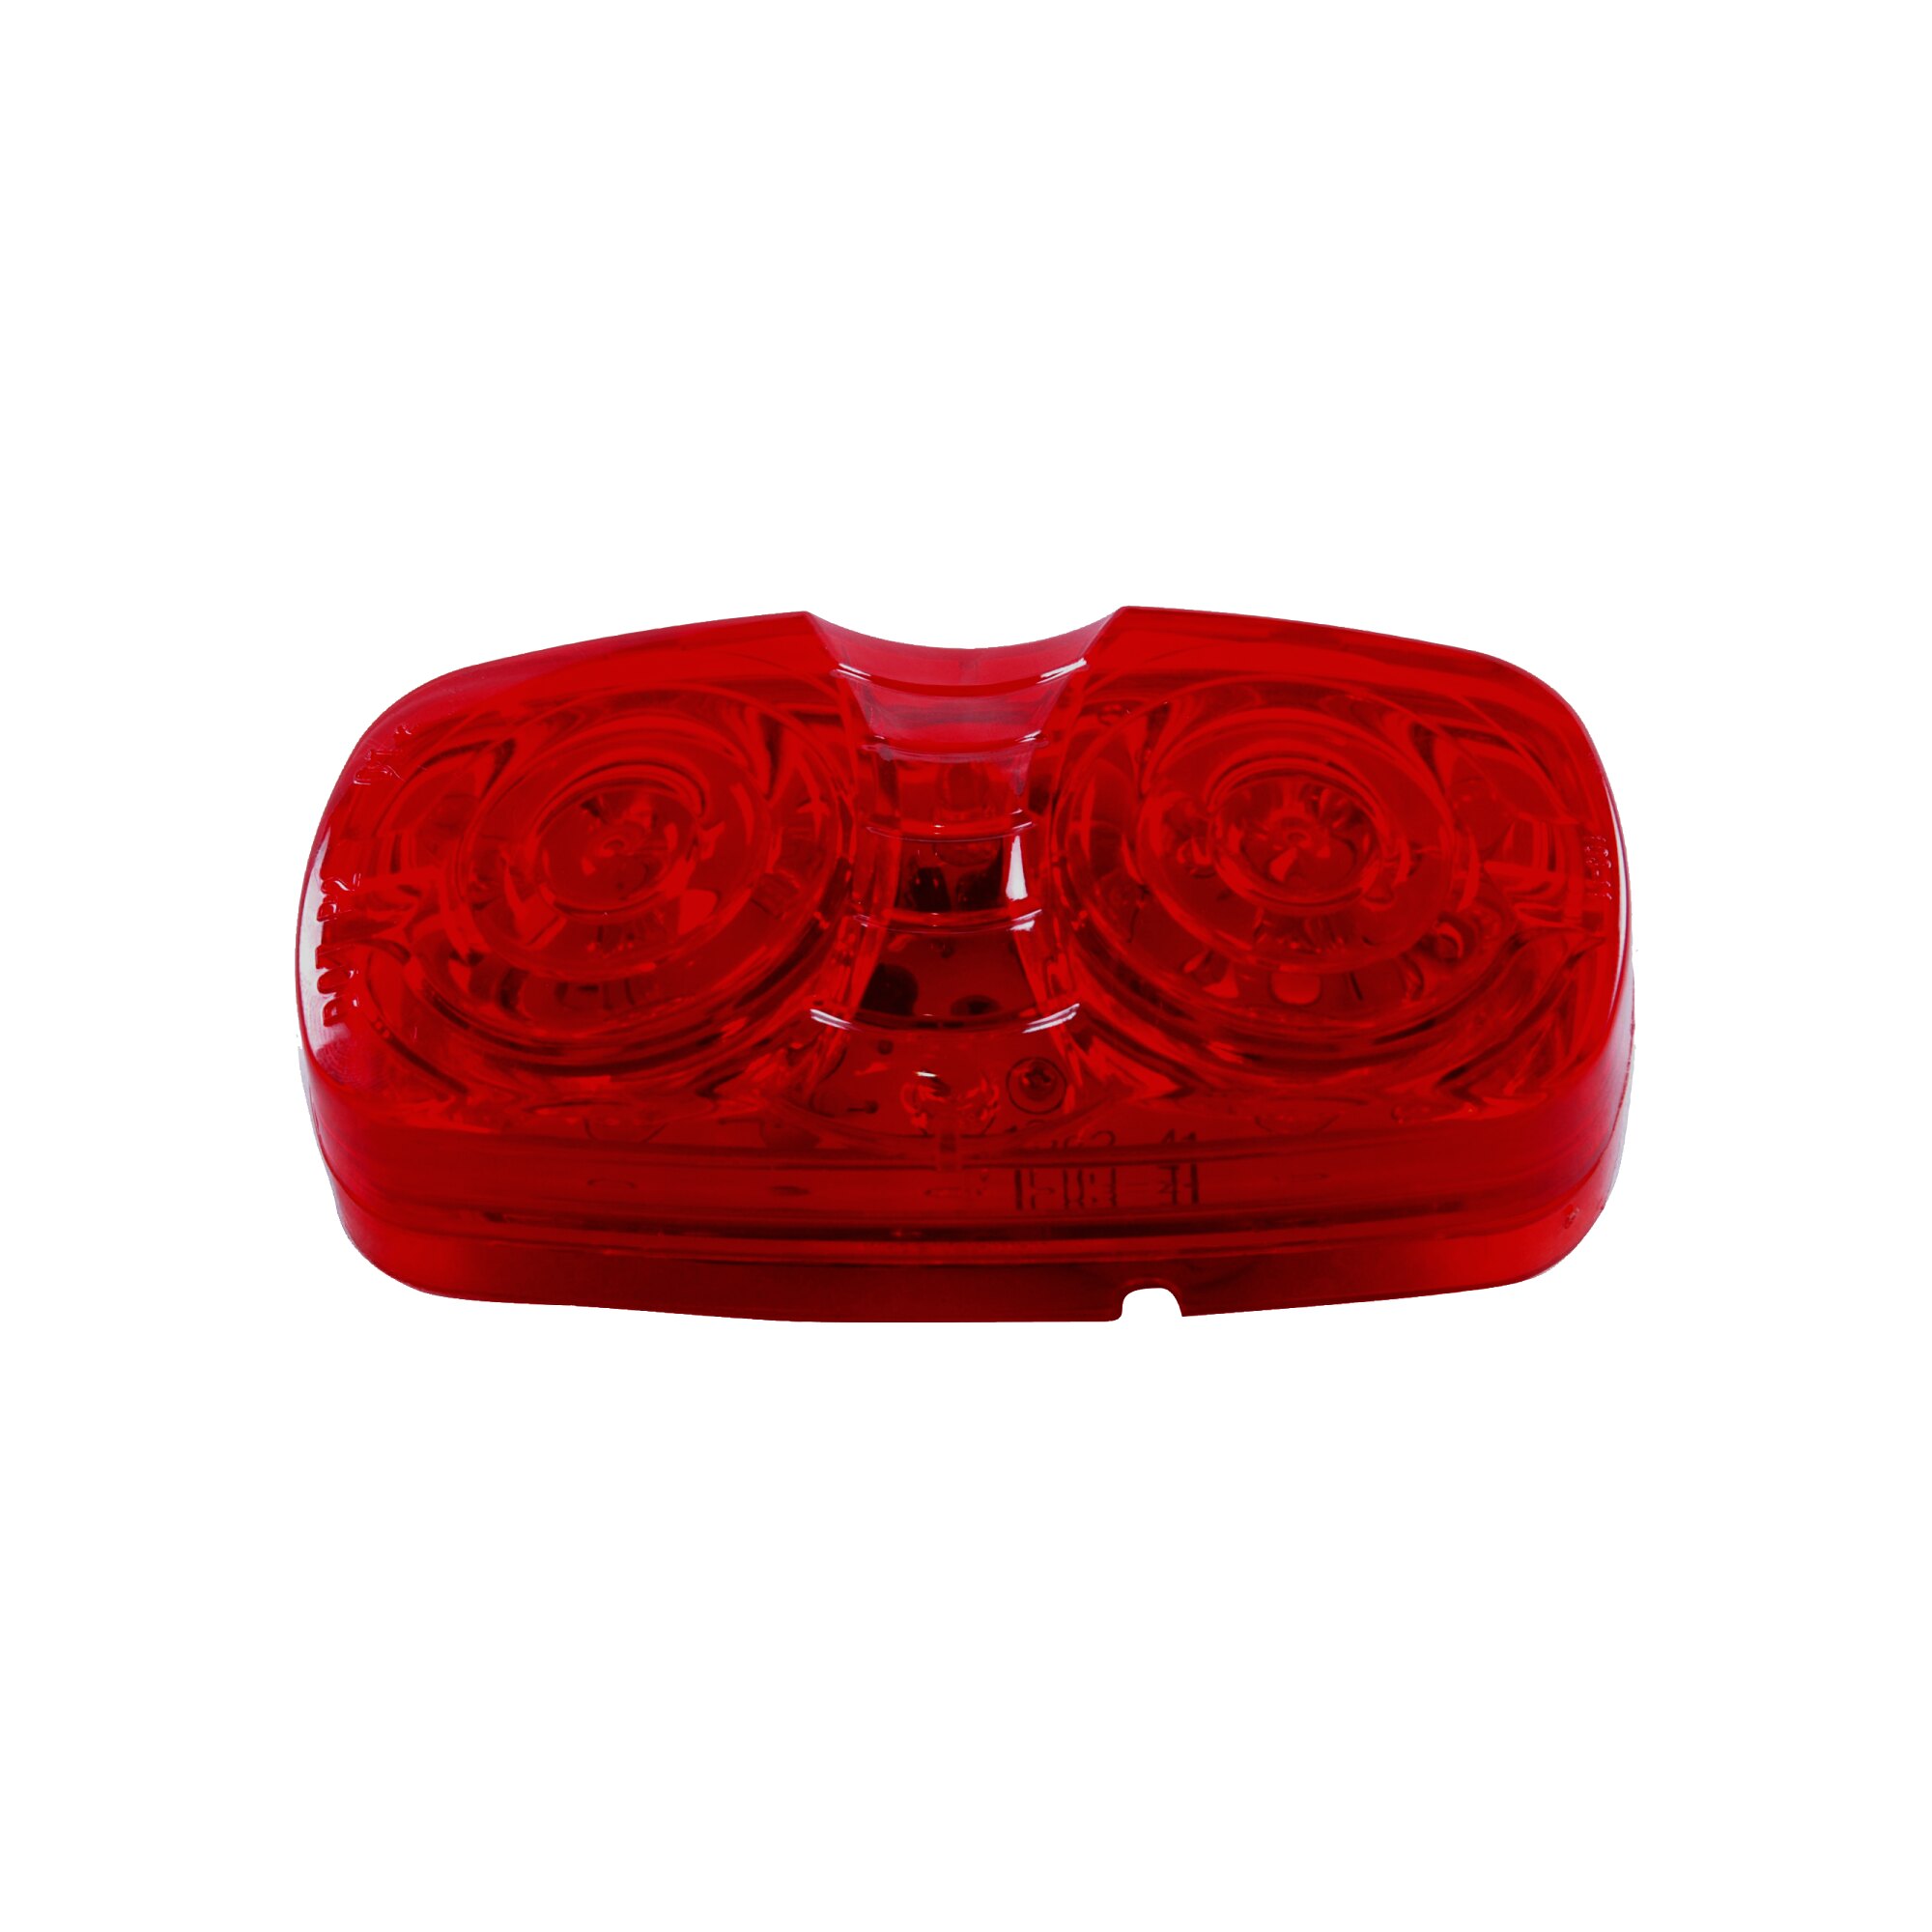 LED CLEARANCE 2X4 RED